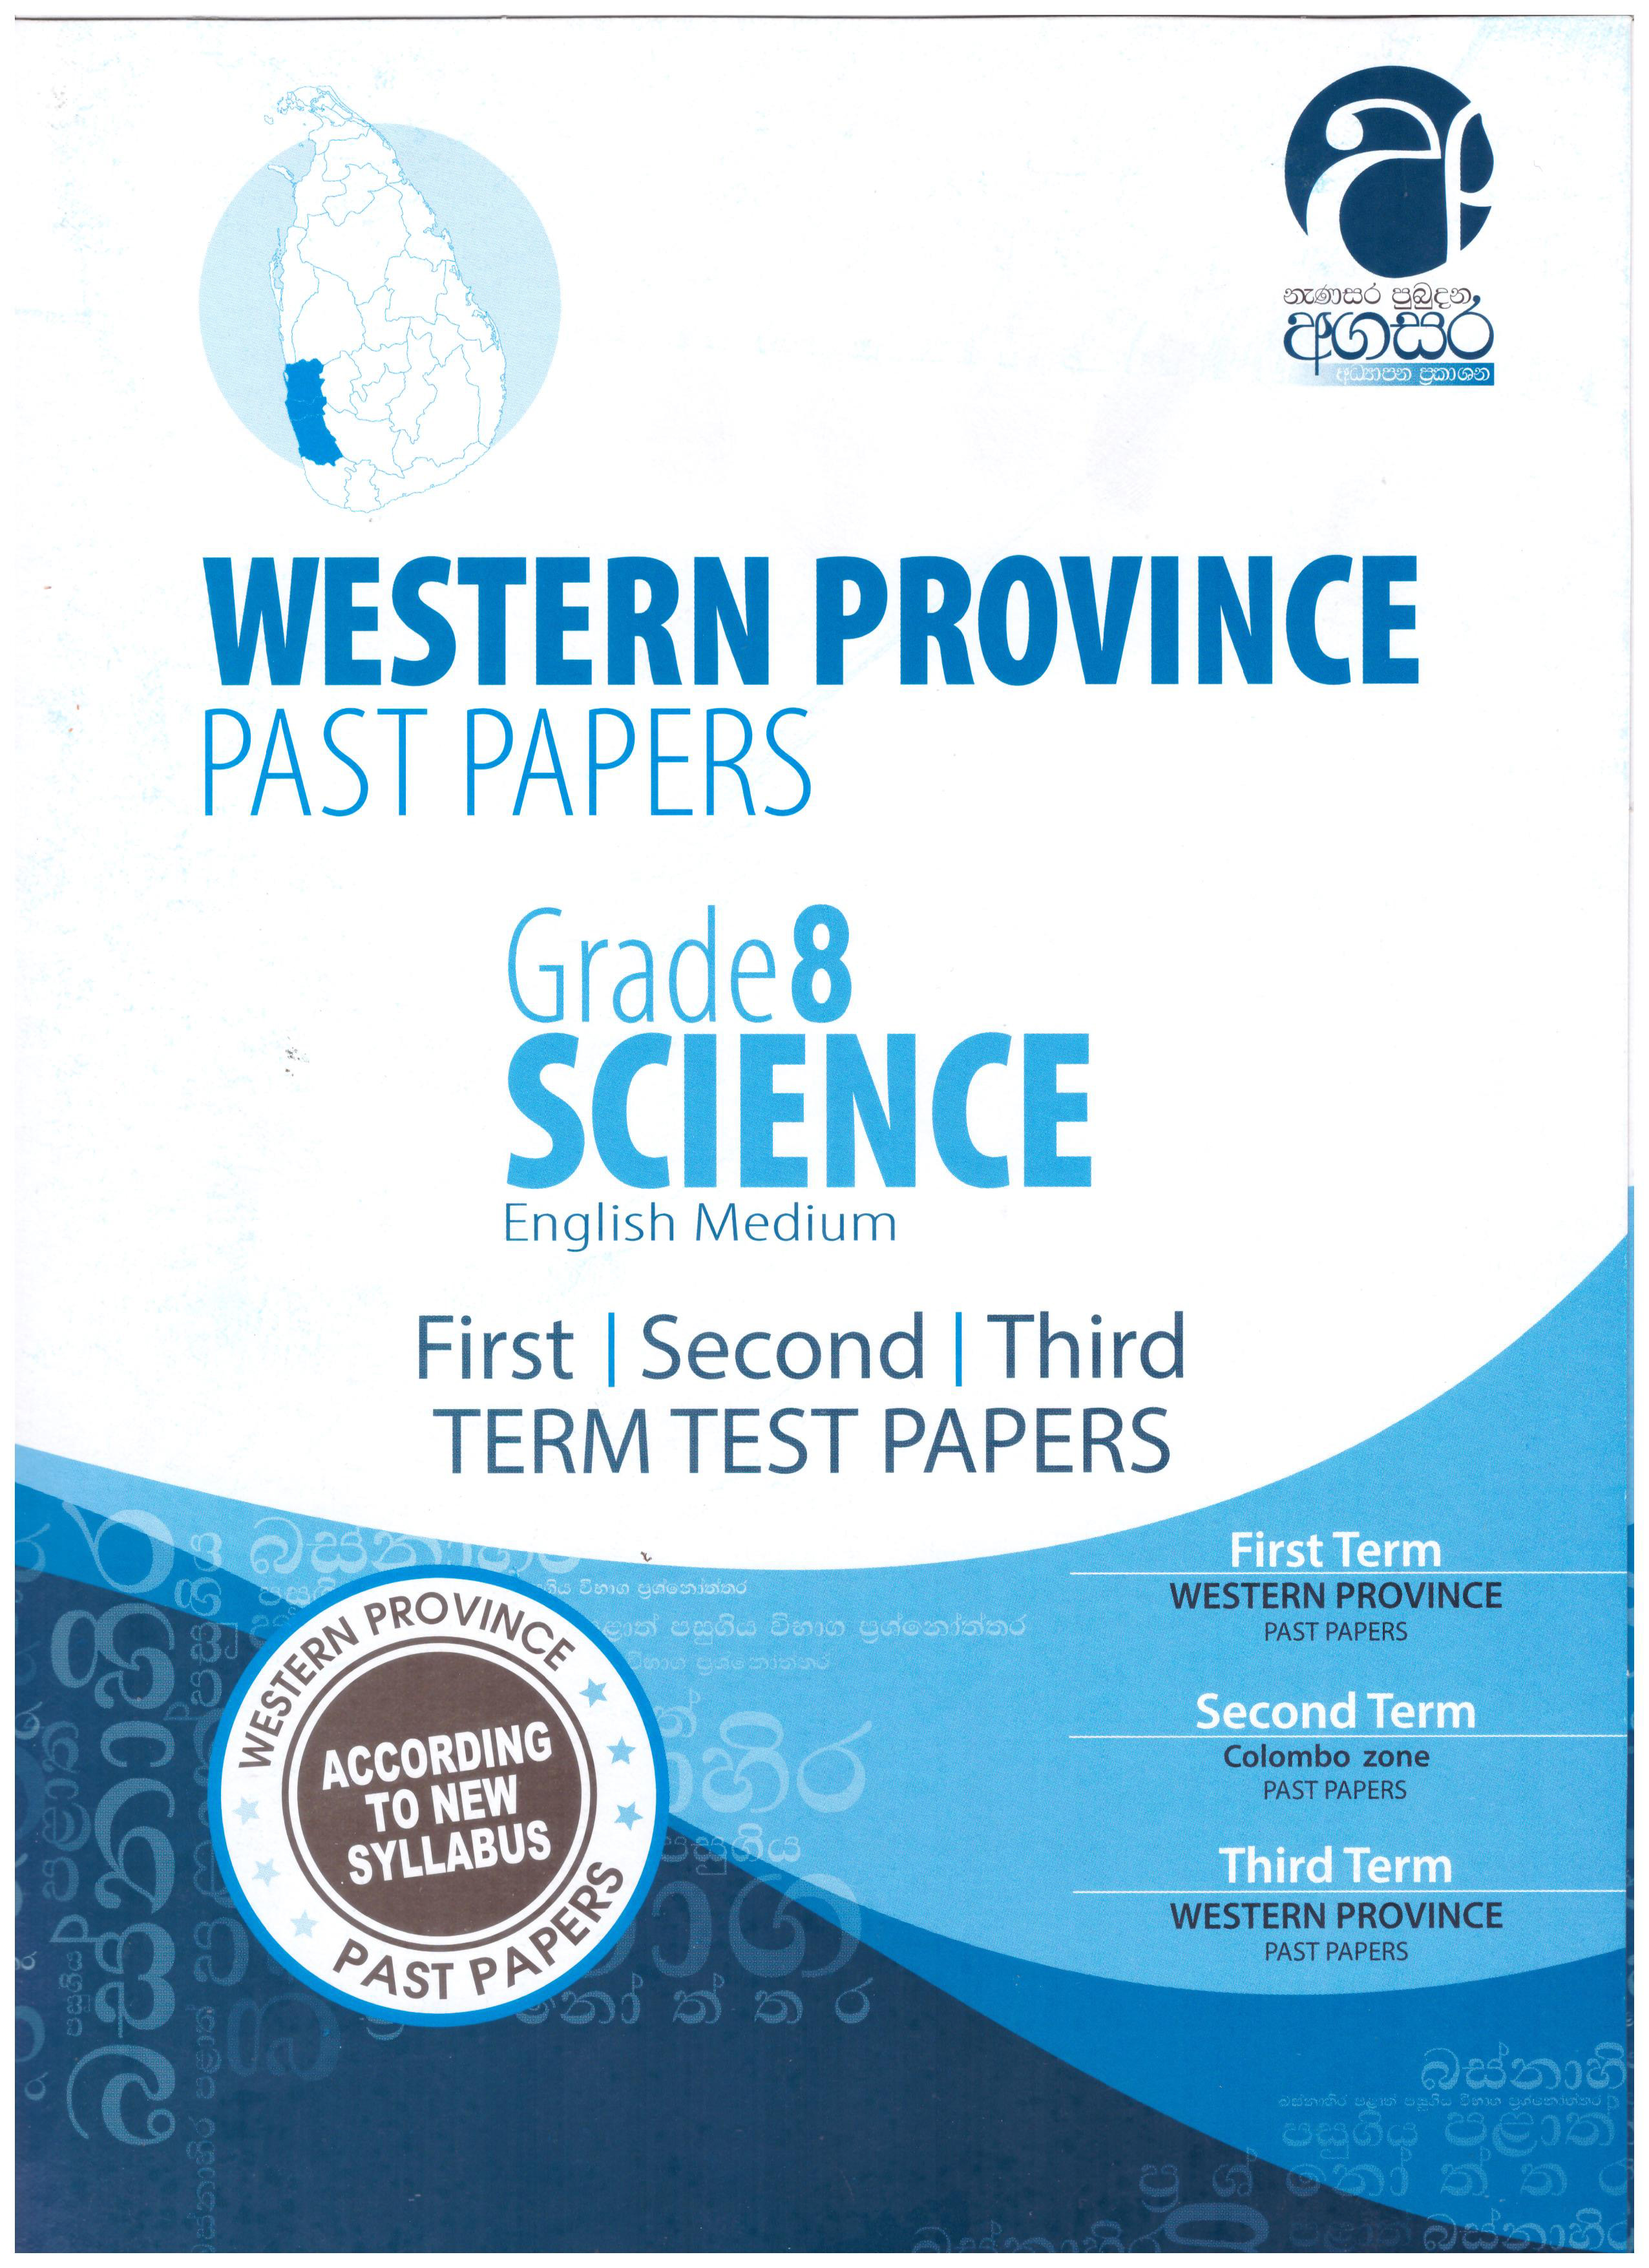 Western Province Past Papers Grade 8 Science (English Medium)